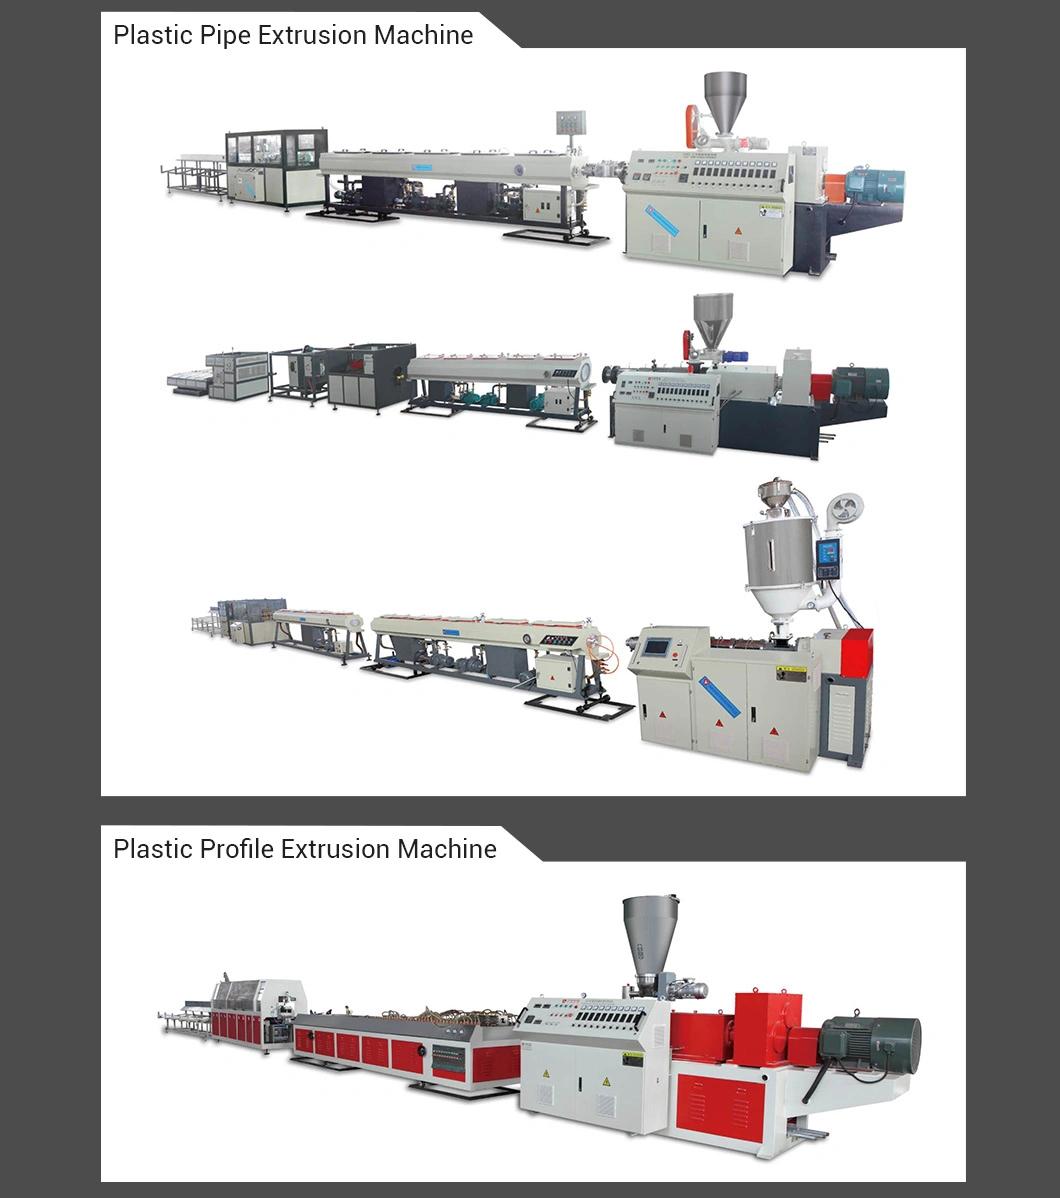 Yatong Small Size PVC Double Pipe Extrusion Line Pipe Production Machine